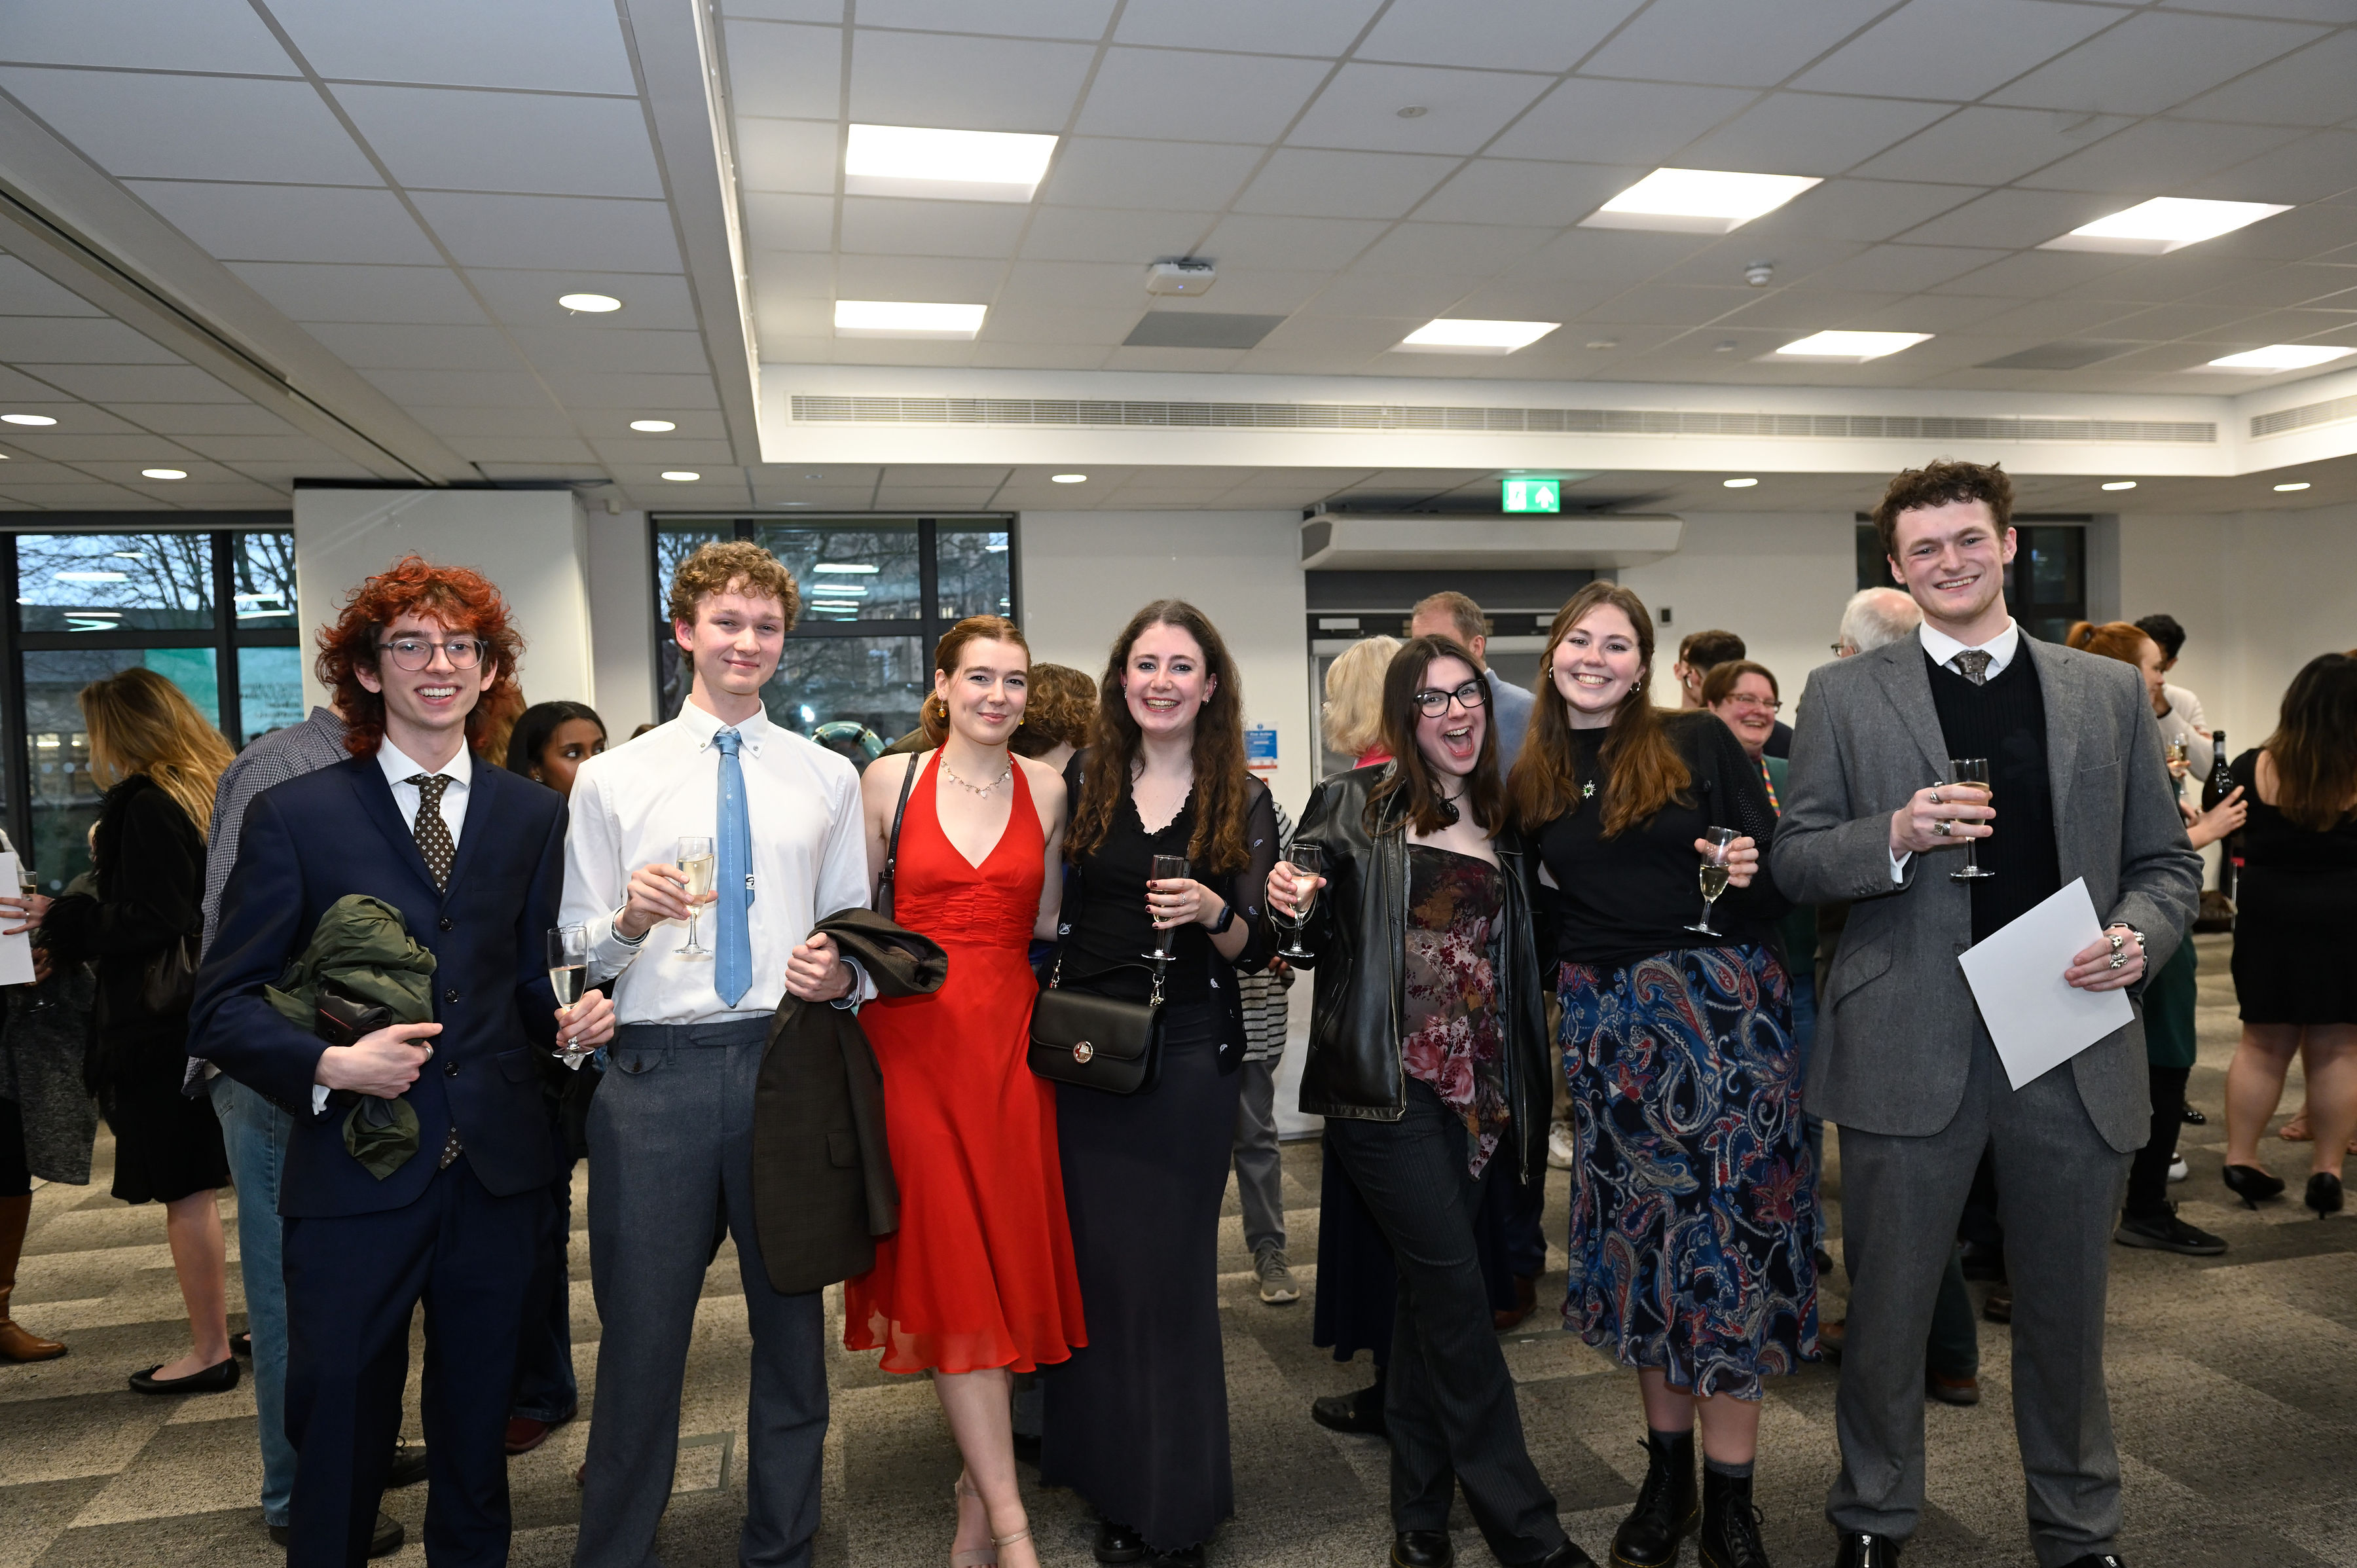 Group of 7 law student prize winners, stood in a row, smiling and looking at the camera, wearing smart clothes and holding champagne flutes.